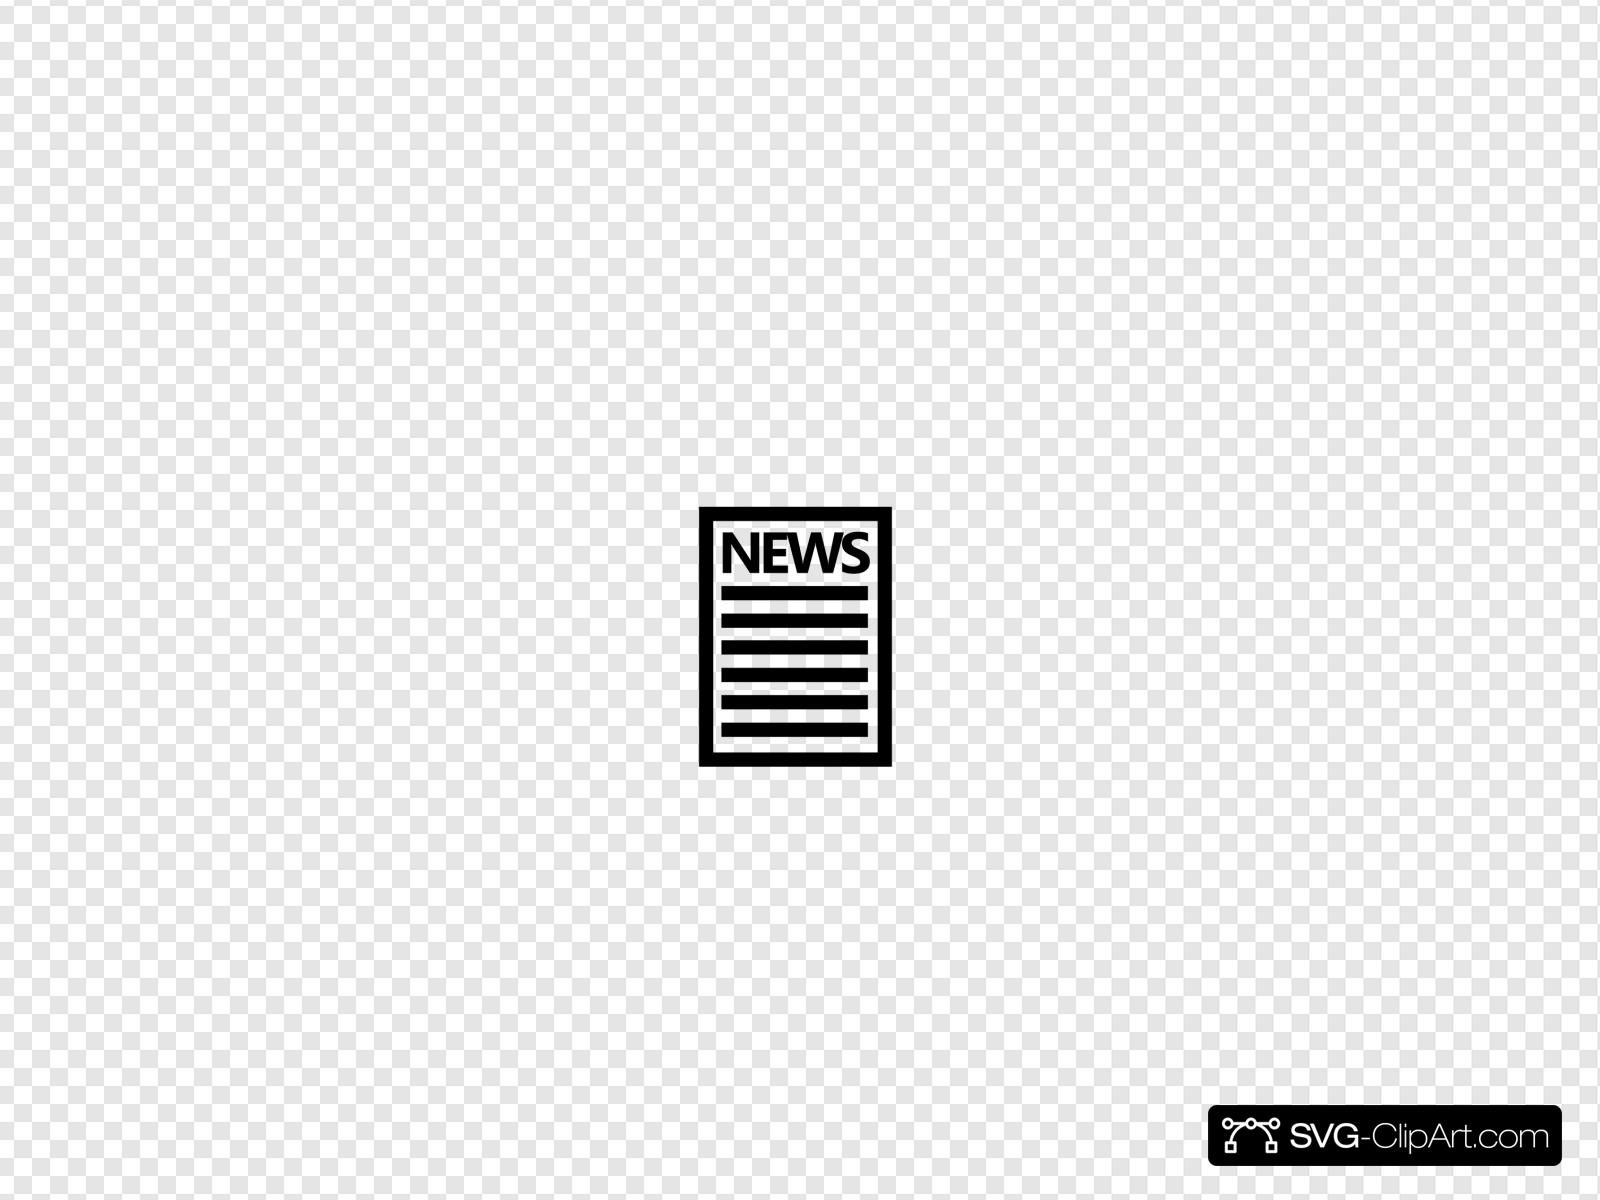 Simple Newspaper Clip art, Icon and SVG